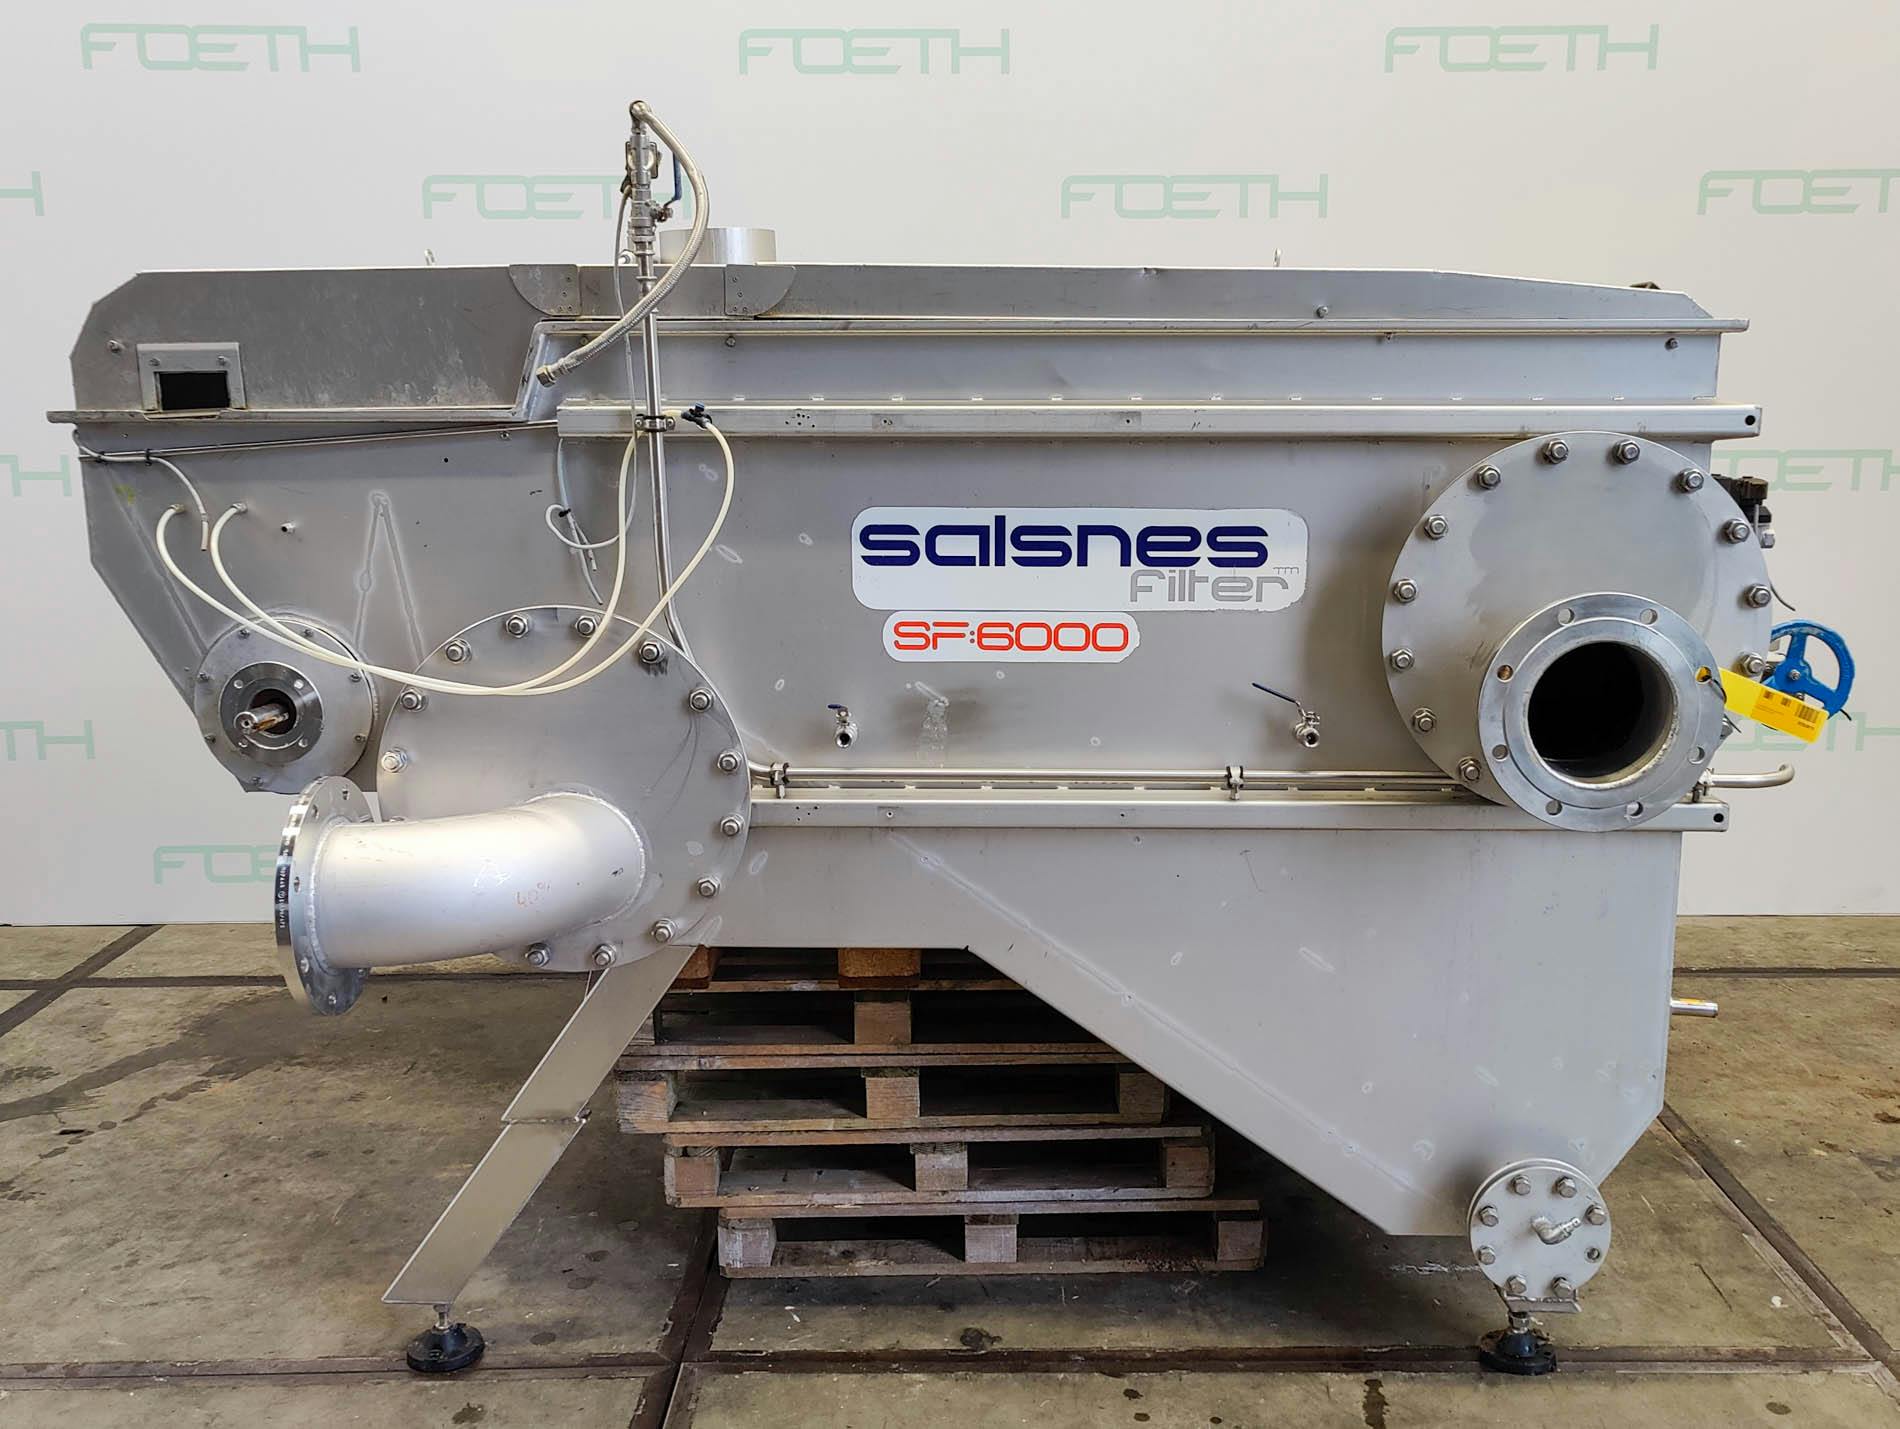 Salsnes 6000 "Solids Separation with Integrated Sludge Thickening and Dewatering" - Filtro vario